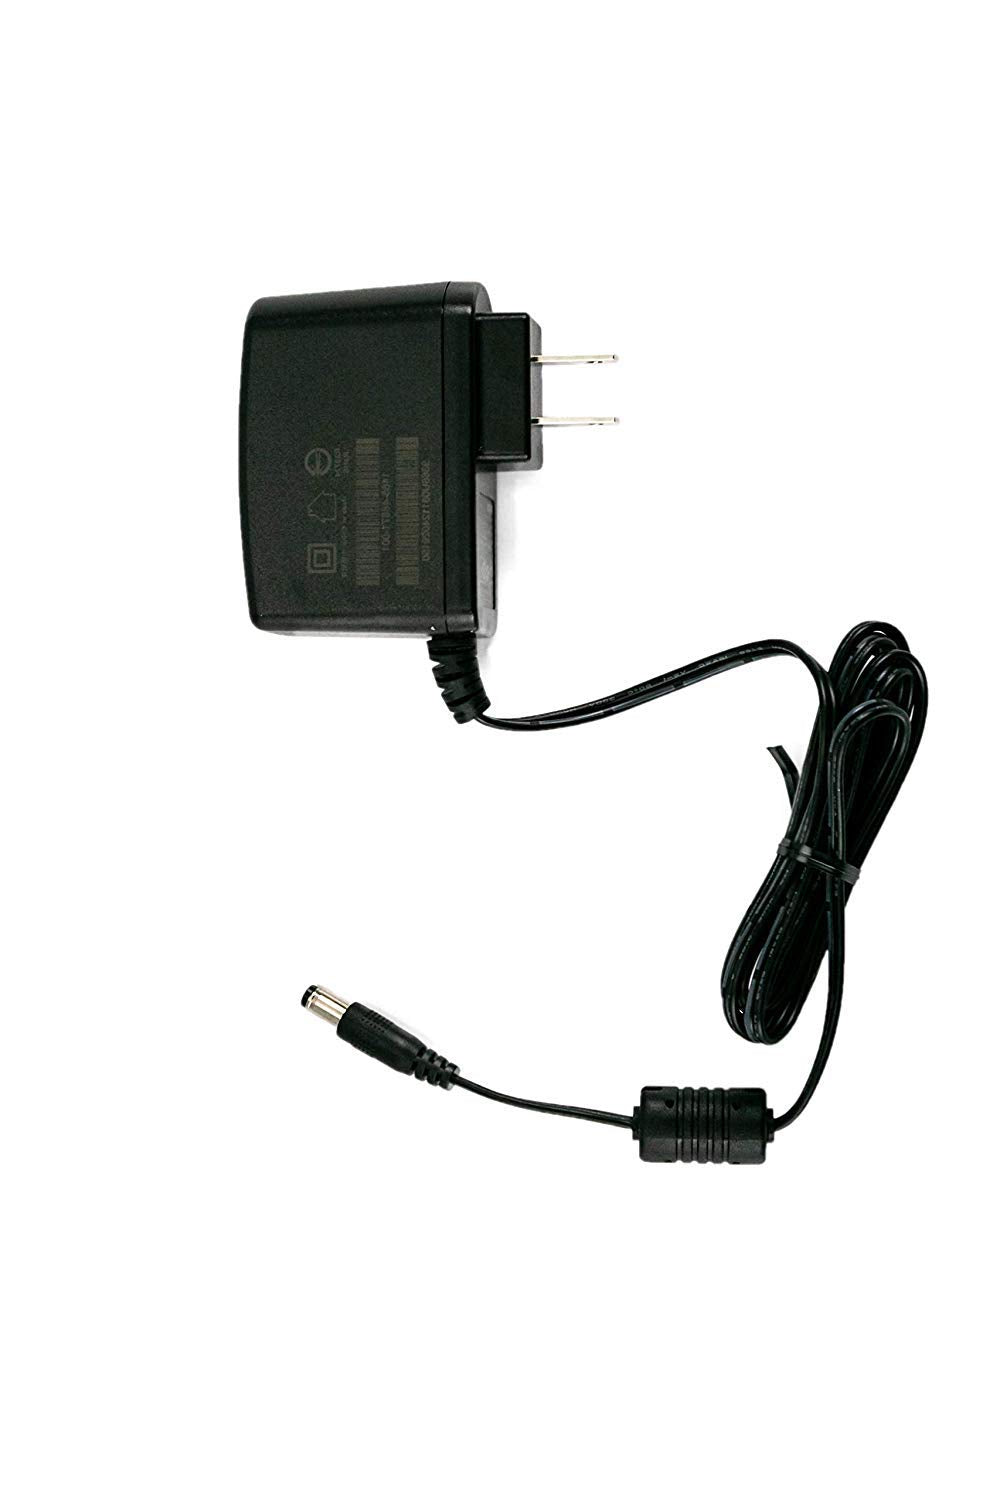 [Australia - AusPower] - GSDT Power Supply Adapter VVX 150/250 5V 3A with Durable Charger Power Cord, Compatible with Polycom VVX150 VVX250 VVX350 VVX450 VoIP Business Phones, UL Listed, 2200-48872-001 1 Pack 